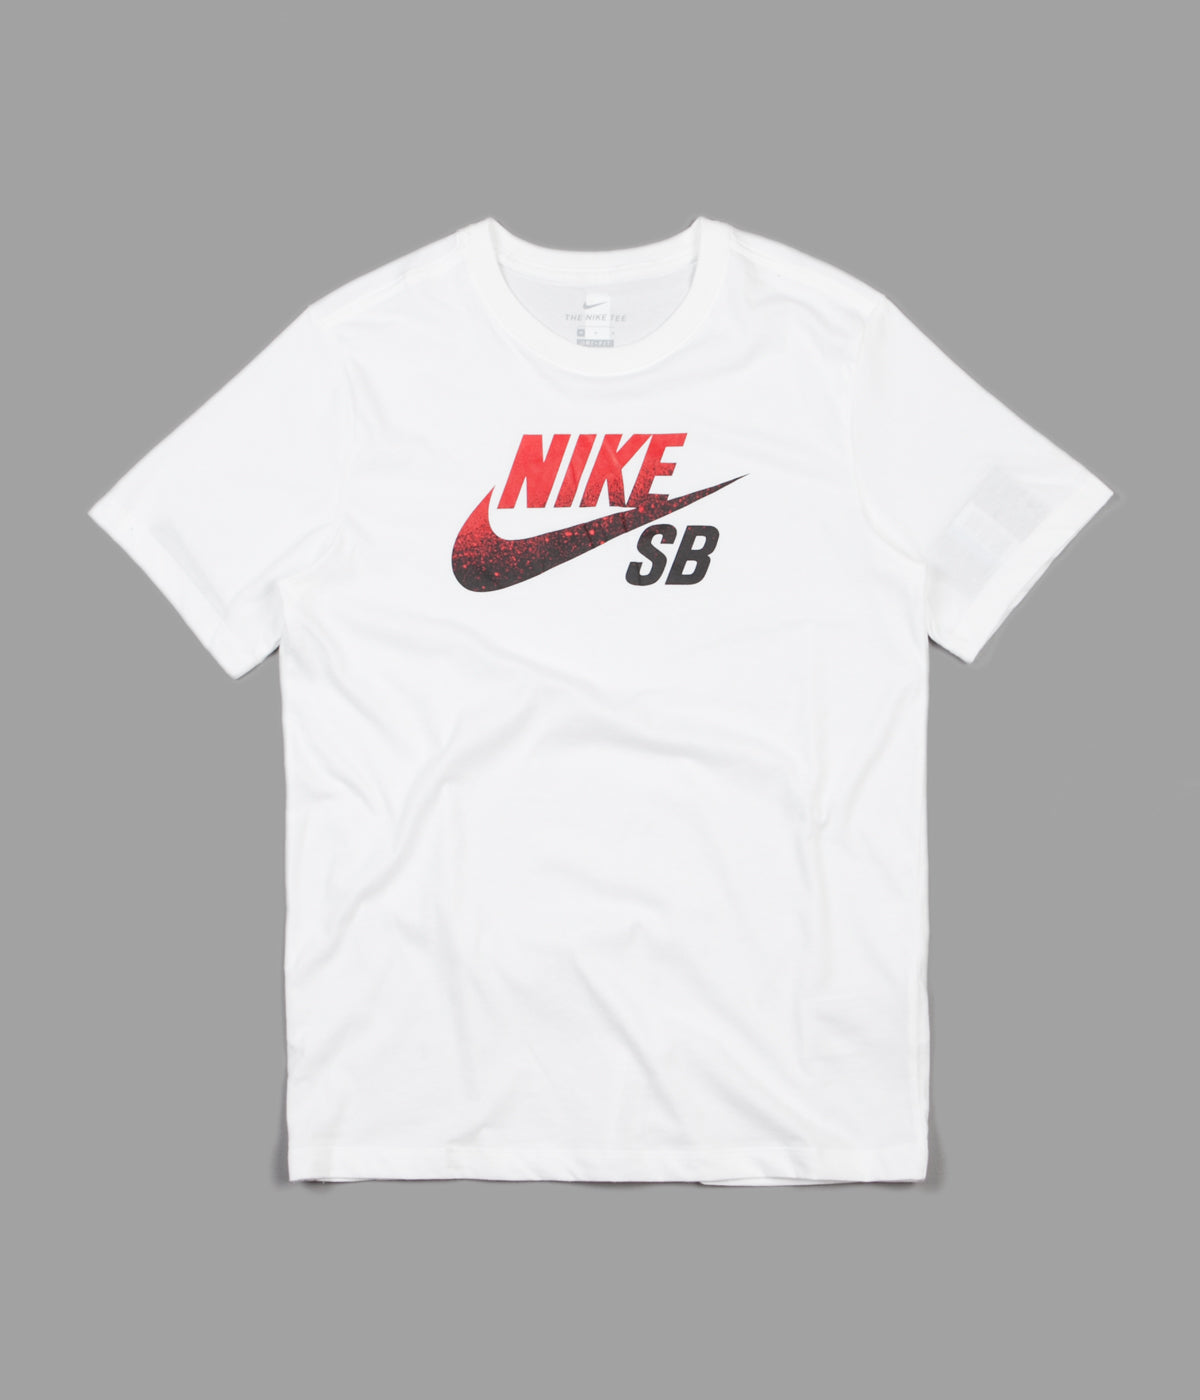 nike shirt white and red